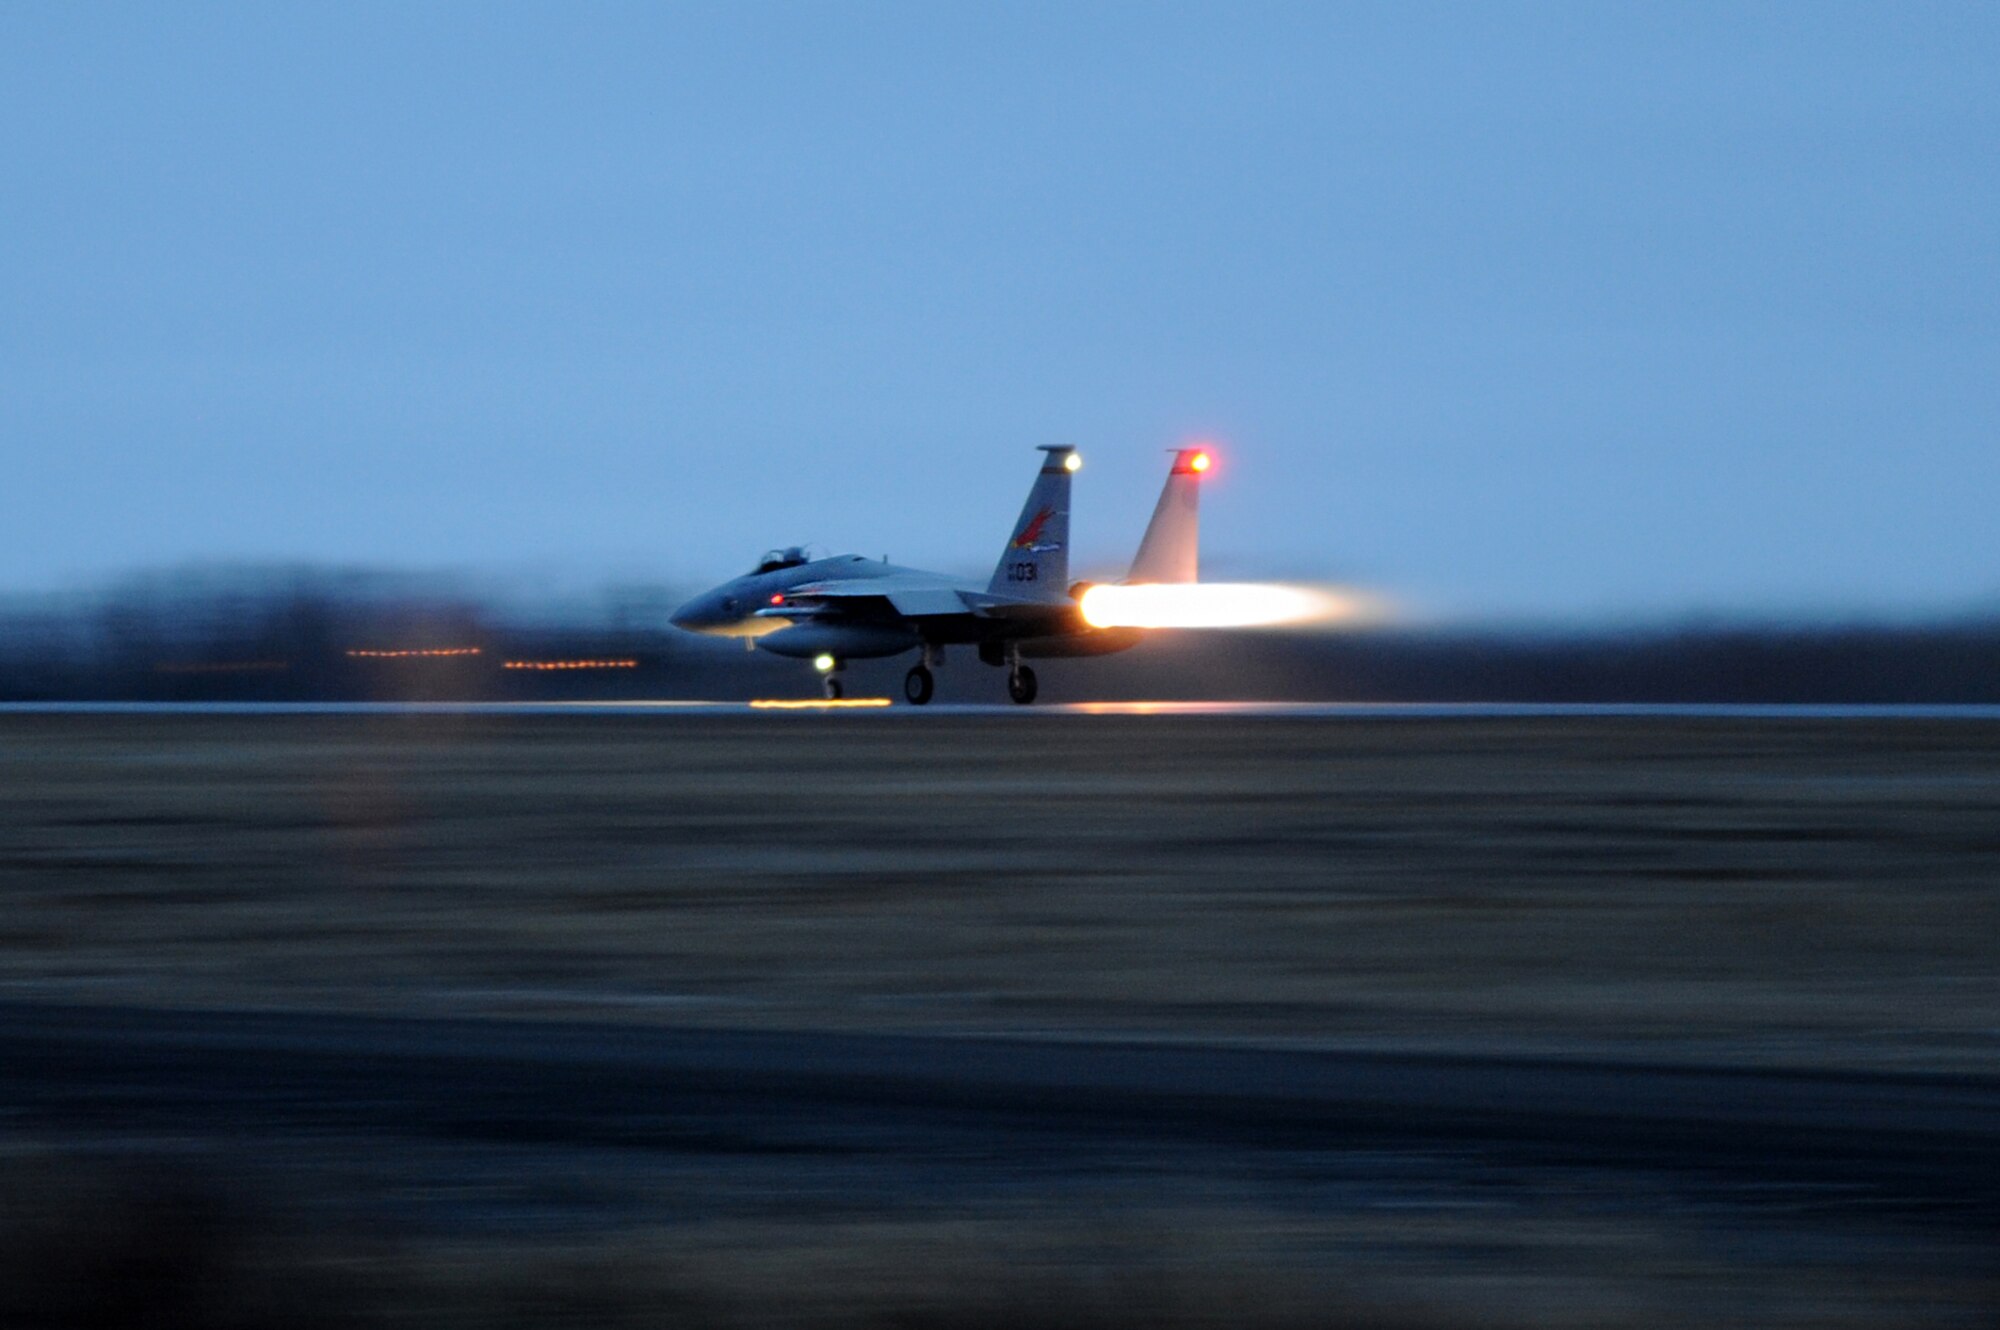 An F-15 Eagle assigned to the 142nd Fighter Wing takes flight in support of Exercise Vigilant Shield 2017, Yellowknife, Northwest Territories, Oct. 20, 2016.  During this exercise, forces supporting North American Aerospace Defense Command (NORAD) will deploy and conduct air sovereignty operations in the far north and the high Arctic demonstrating the ability to detect, identify and meet possible threats in some of the most remote regions in the world.  (U.S. Air National Guard photo by Senior Master Sgt. Shelly Davison, 142nd Fighter Wing Public Affairs). 